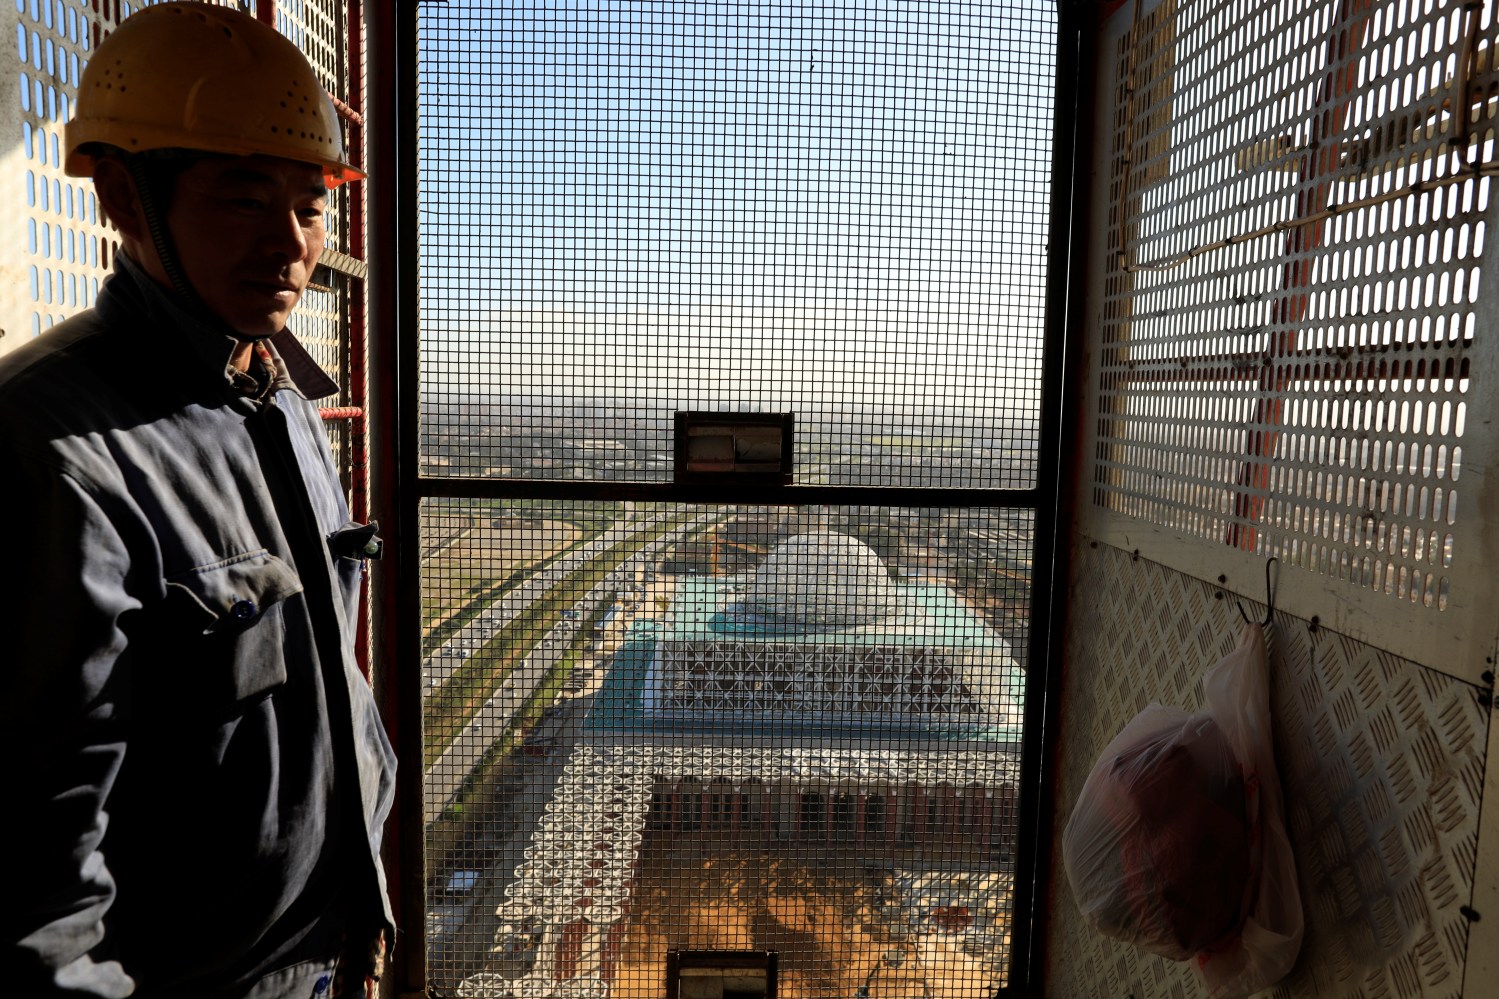 A Chinese worker uses the elevator of the 270-metre-high minaret at the construction site of the new Great Mosque of Algiers, called Djemaa El Djazair, which is being built by the China State Construction Engineering Corporation (CSCEC), and overseen by Algeria's National Agency for Realization and Management (ANERGEMA) in Algiers, Algeria February 7, 2017. REUTERS/Zohra Bensemra - RC190C8B5940